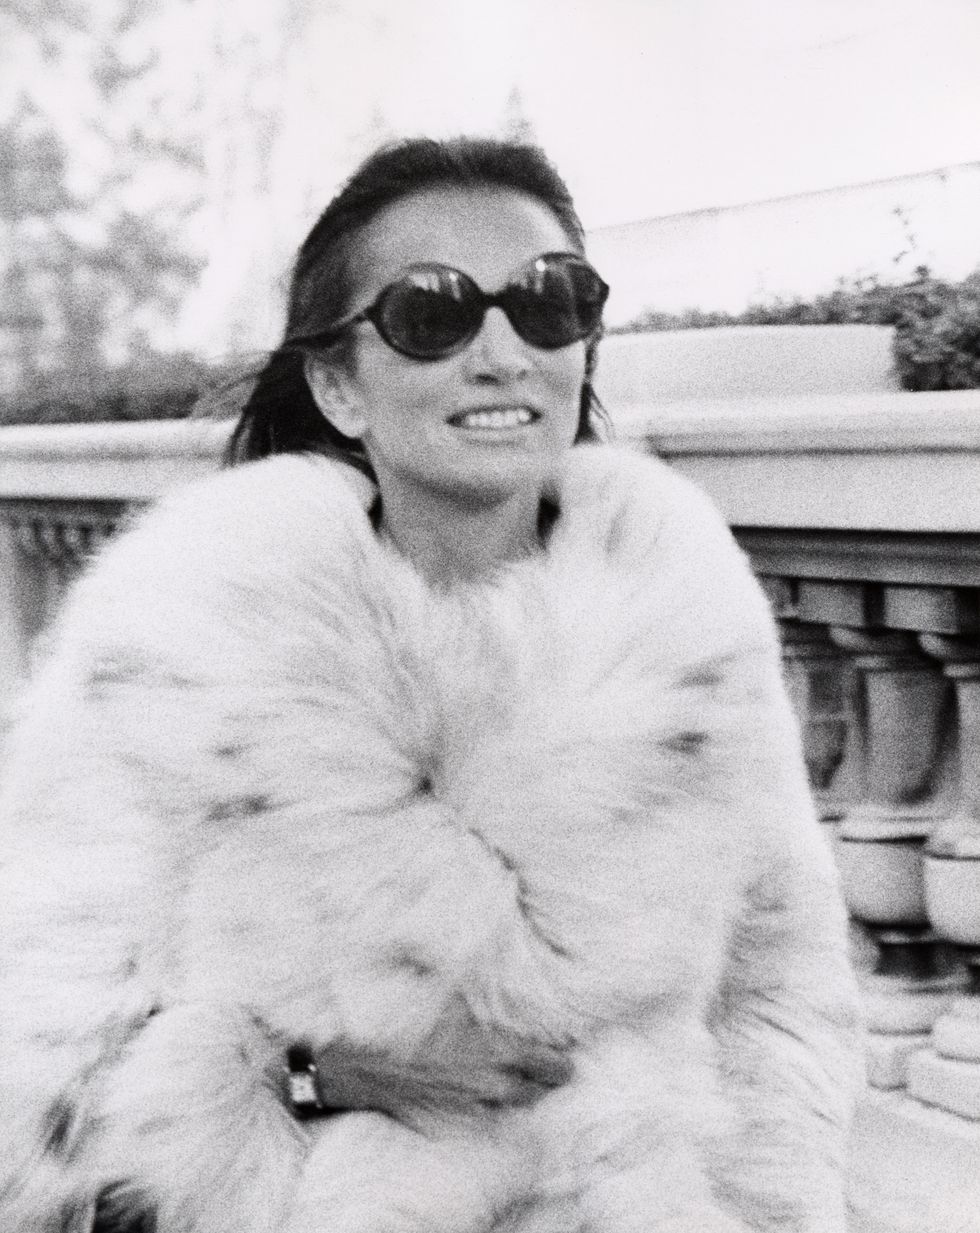 lee radziwill photo by ron galellaron galella collection via getty images